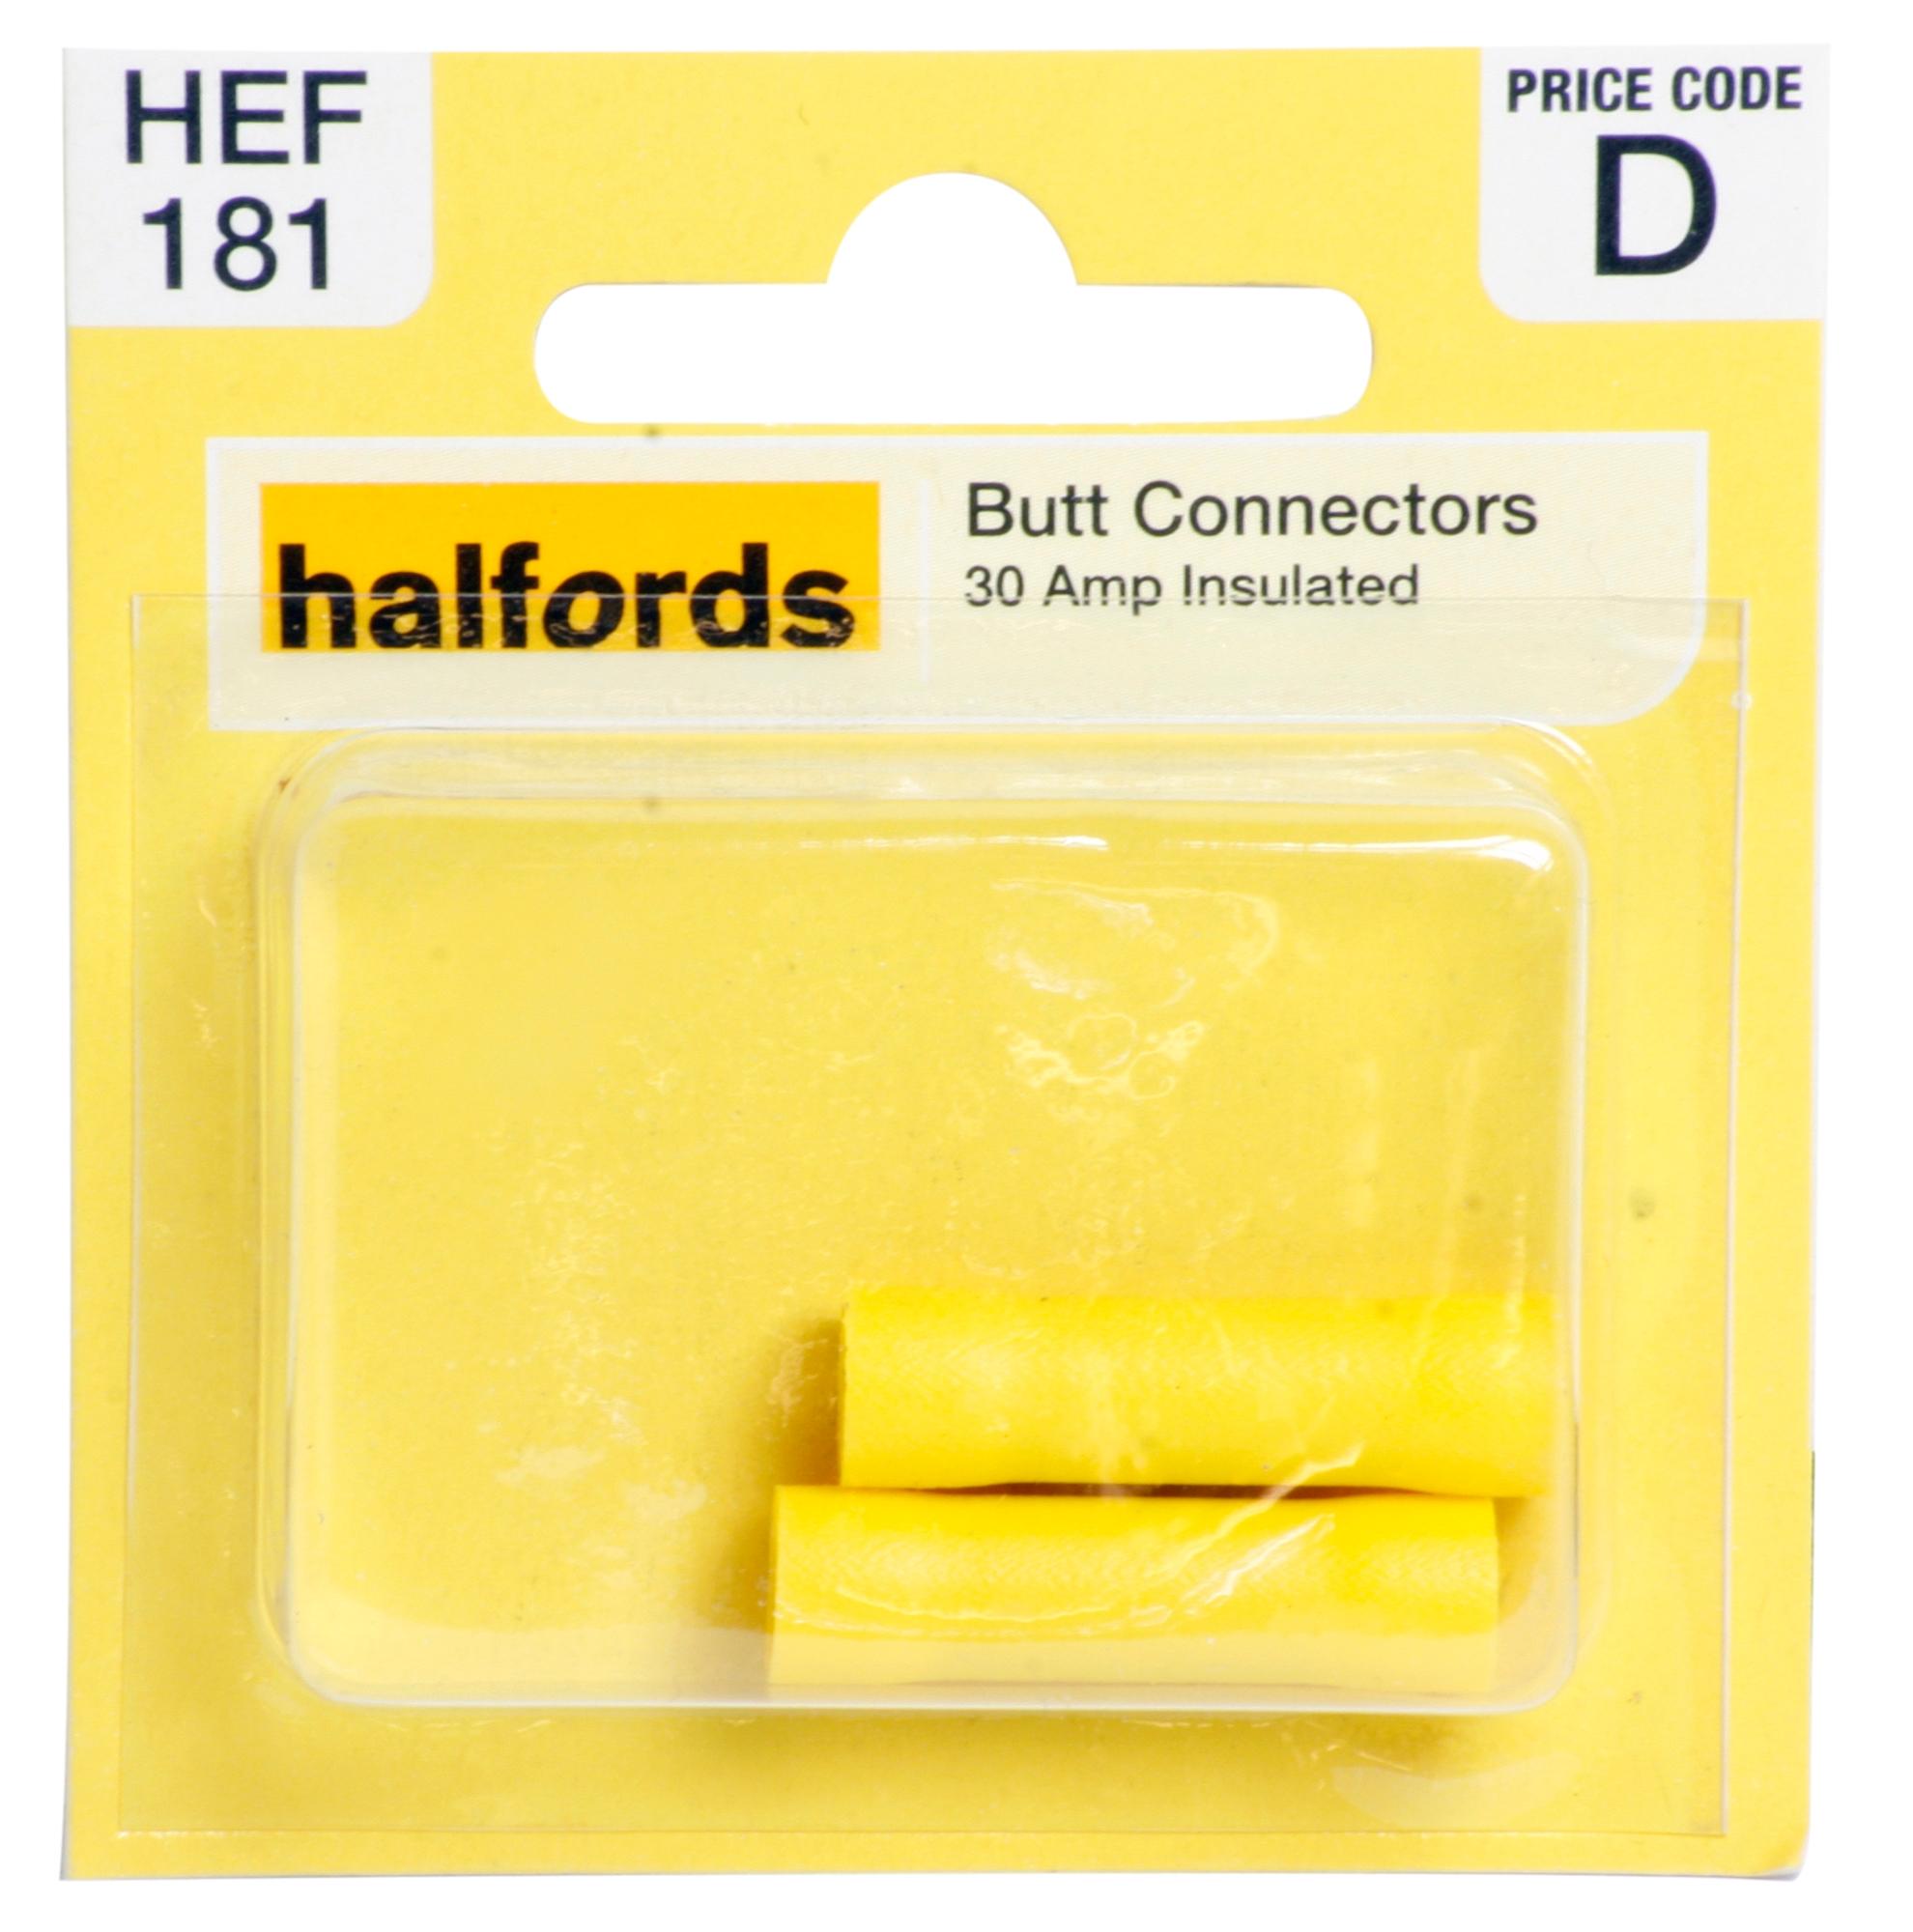 Halfords Butt Connectors 30 Amp Insulated